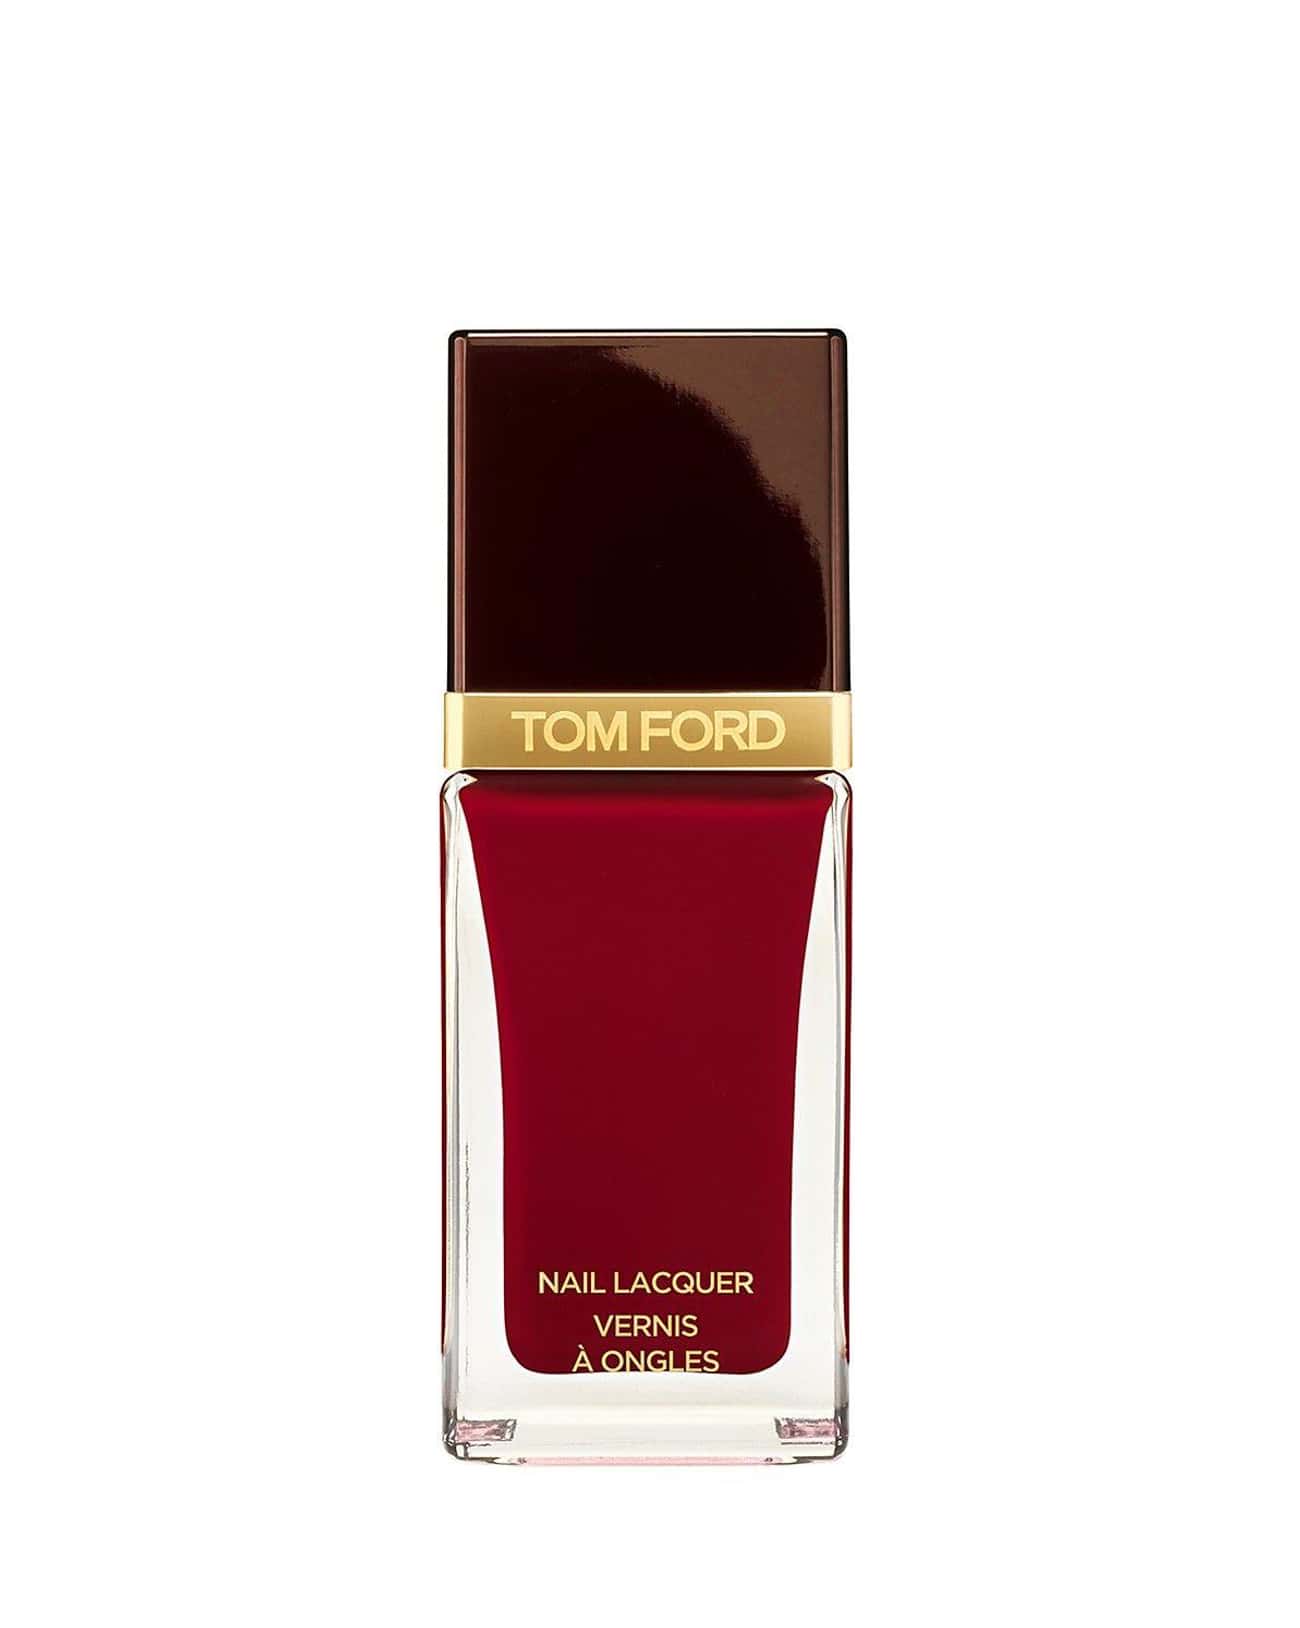 Aries (March 21 - April 19) - Tom Ford In Smoke Red